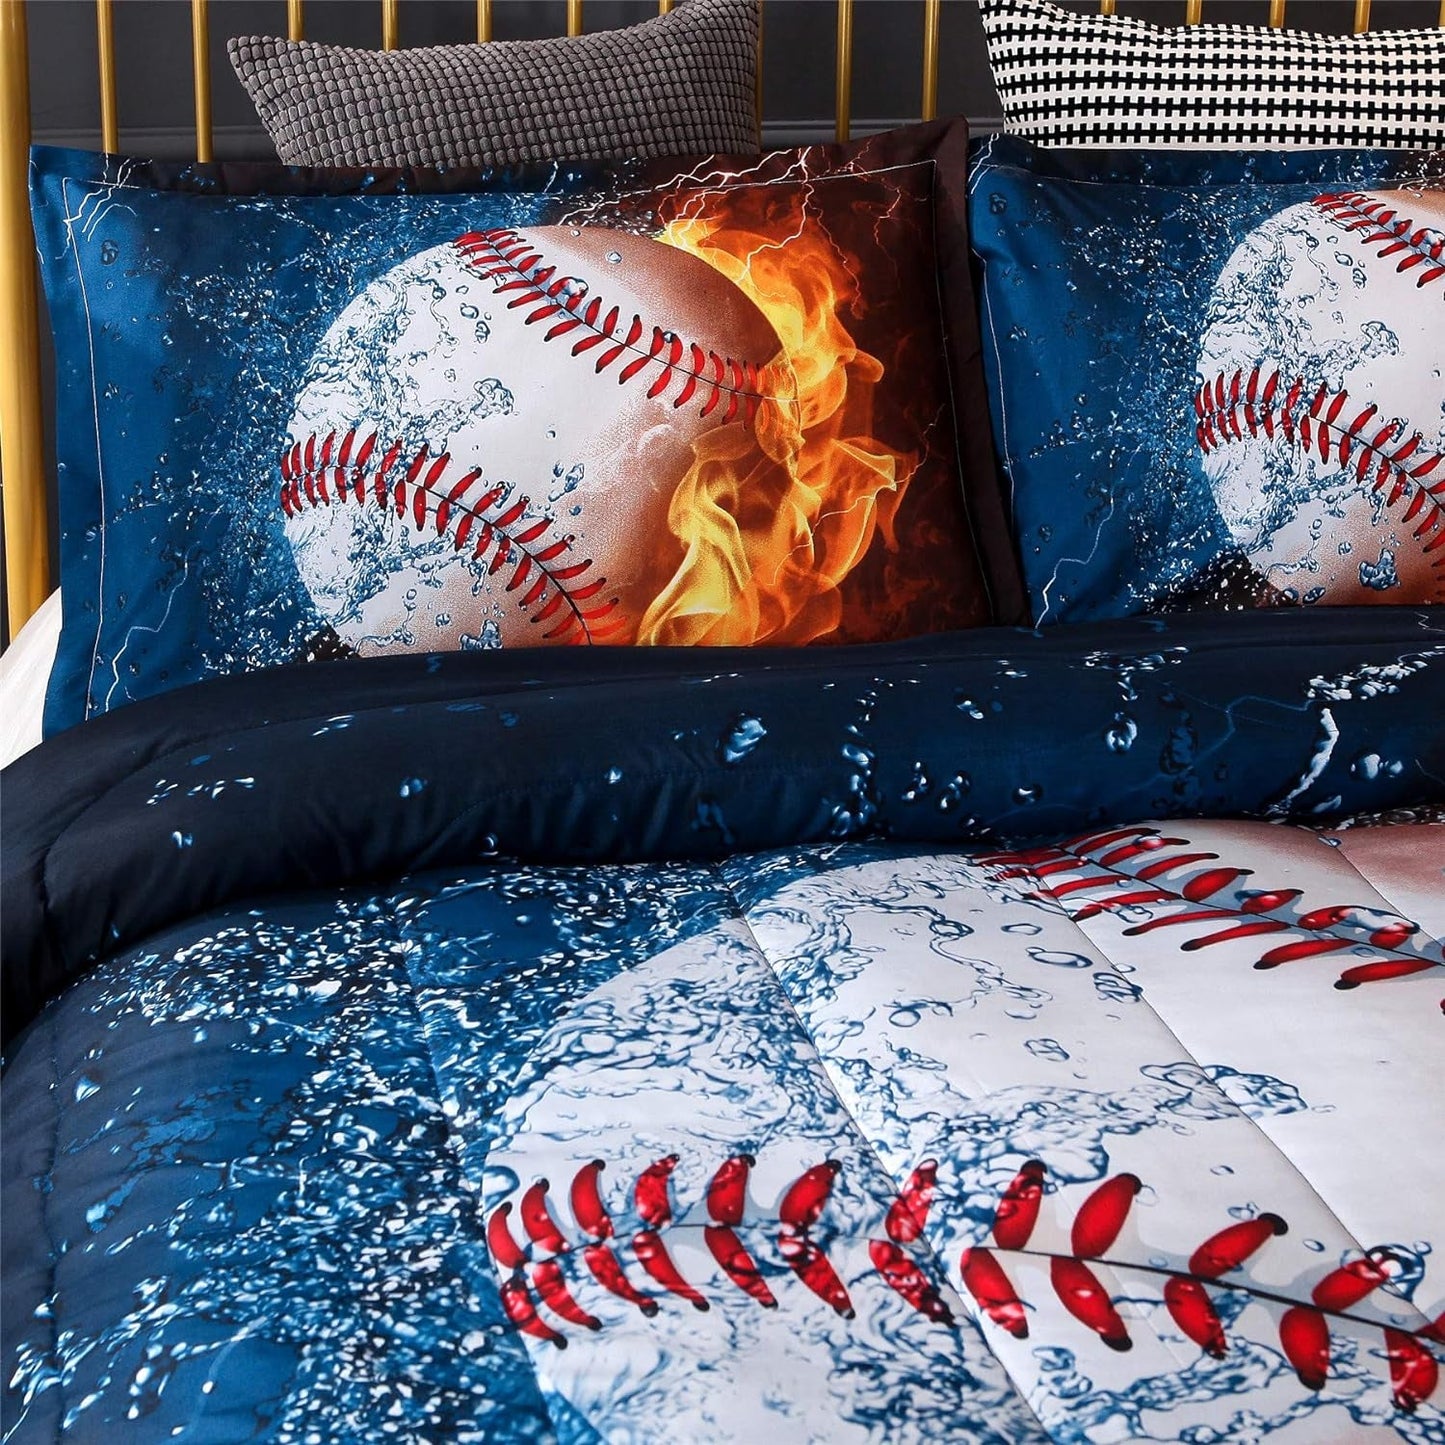 A Nice Night Baseball with Fire Print Comforter Quilt Set Bedding Sets for Teen Boys (Baseball,Full Size)